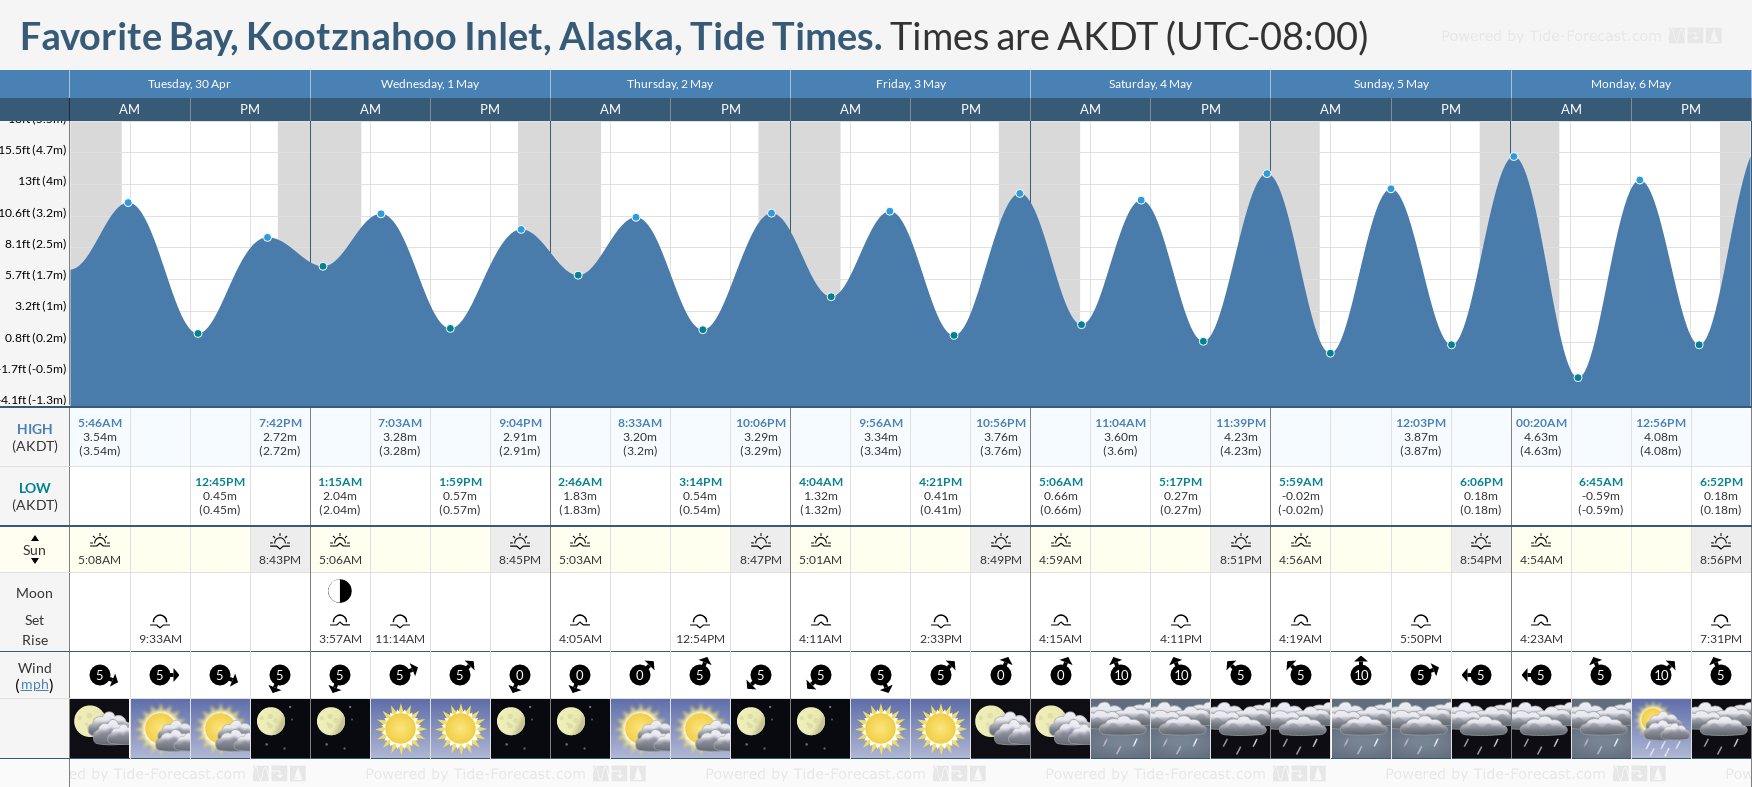 Favorite Bay, Kootznahoo Inlet, Alaska Tide Chart including high and low tide tide times for the next 7 days